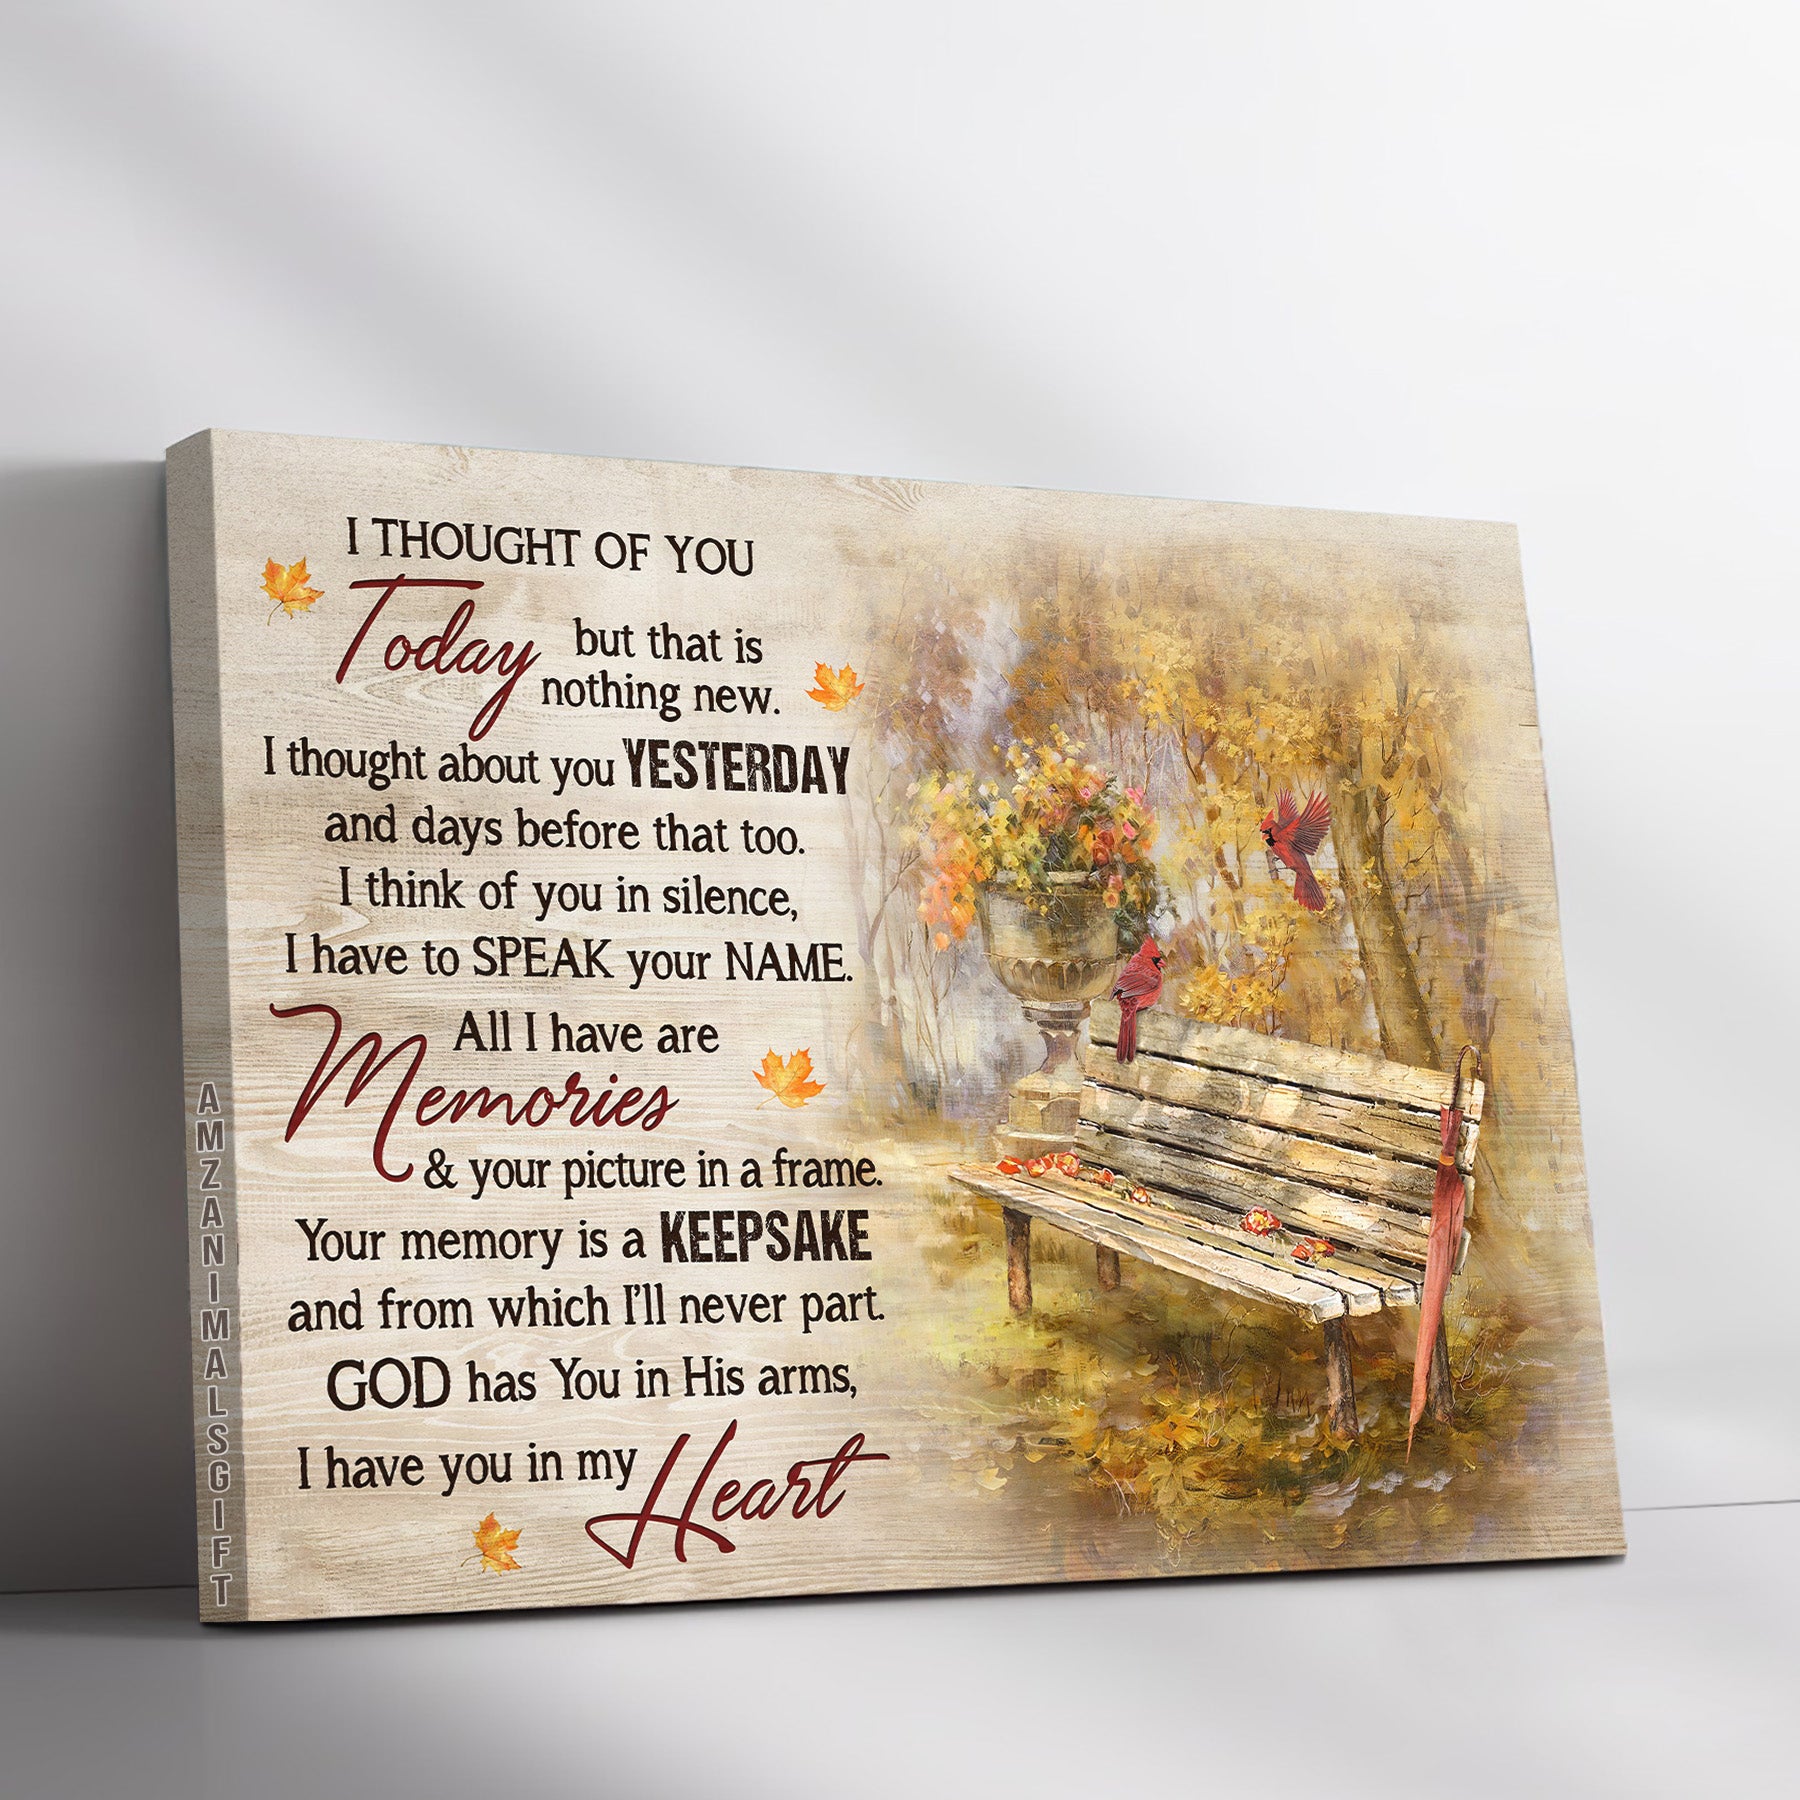 Memorial Premium Wrapped Landscape Canvas - Wooden Chair, Red Cardinal, Beautiful Autumn Park, I Thought Of You Today - Heaven Gift For Members Family